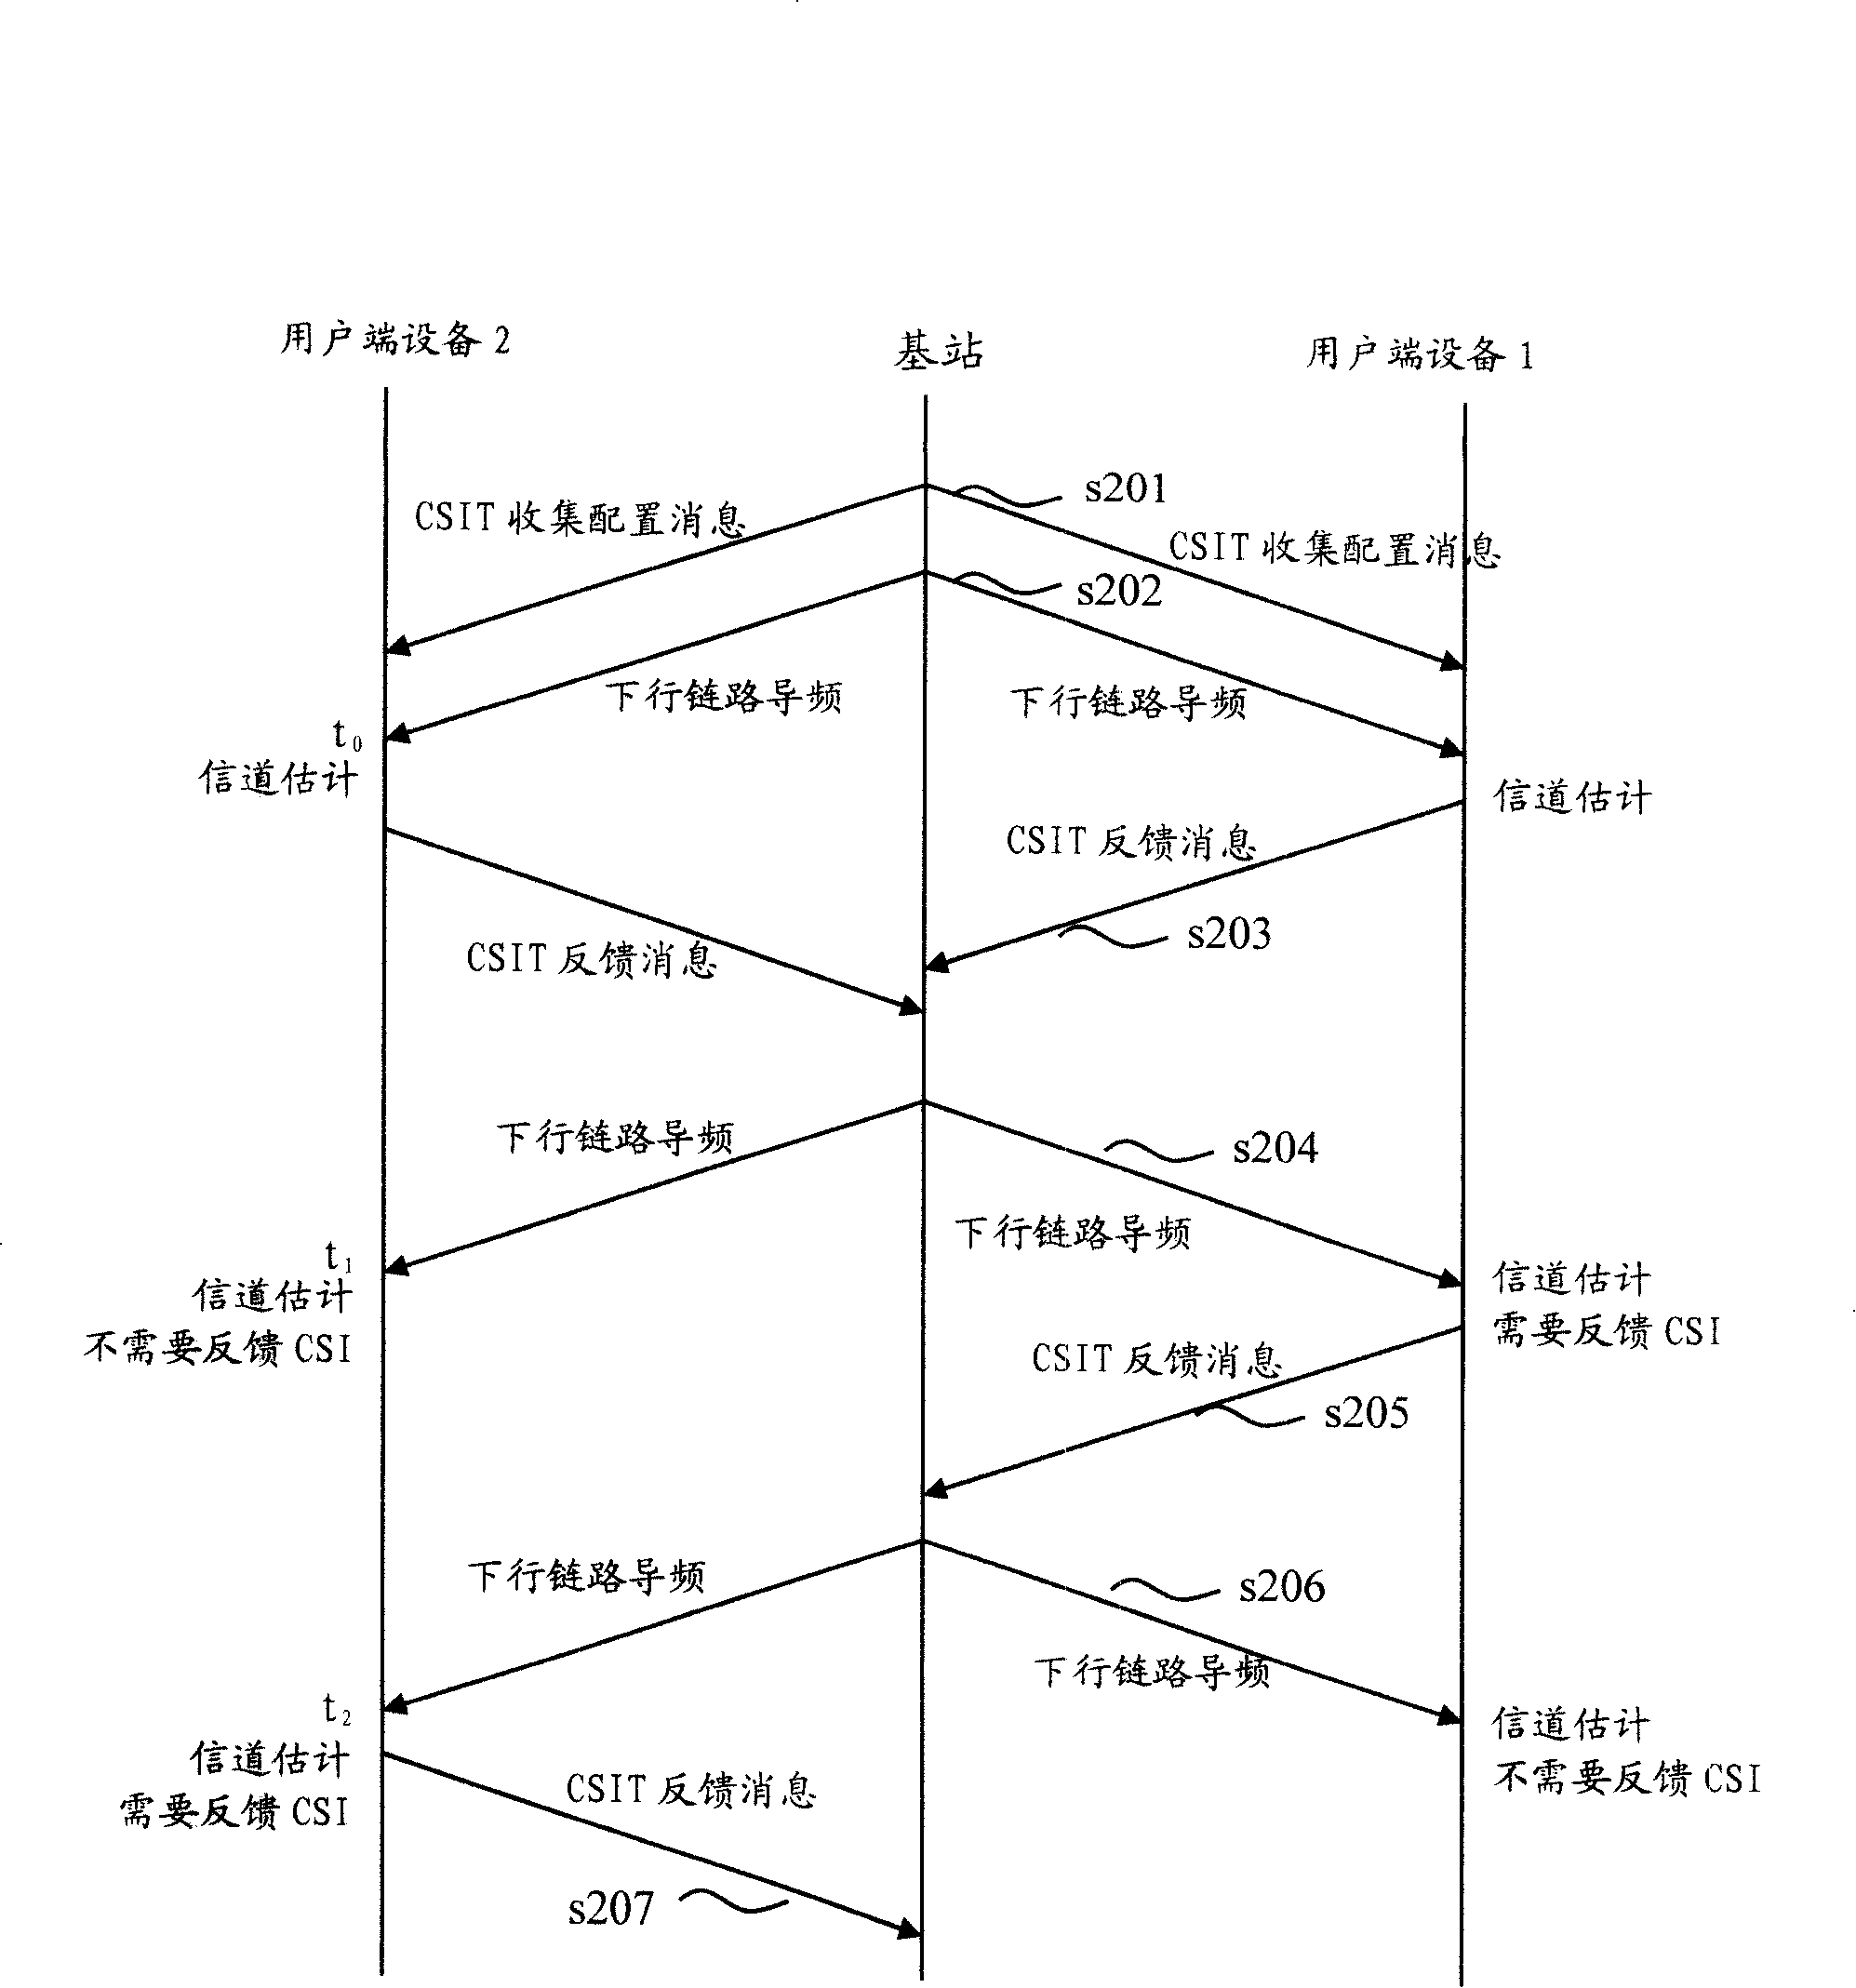 CSIT collection method, cross-layer scheduling algorithm, and its system and equipment